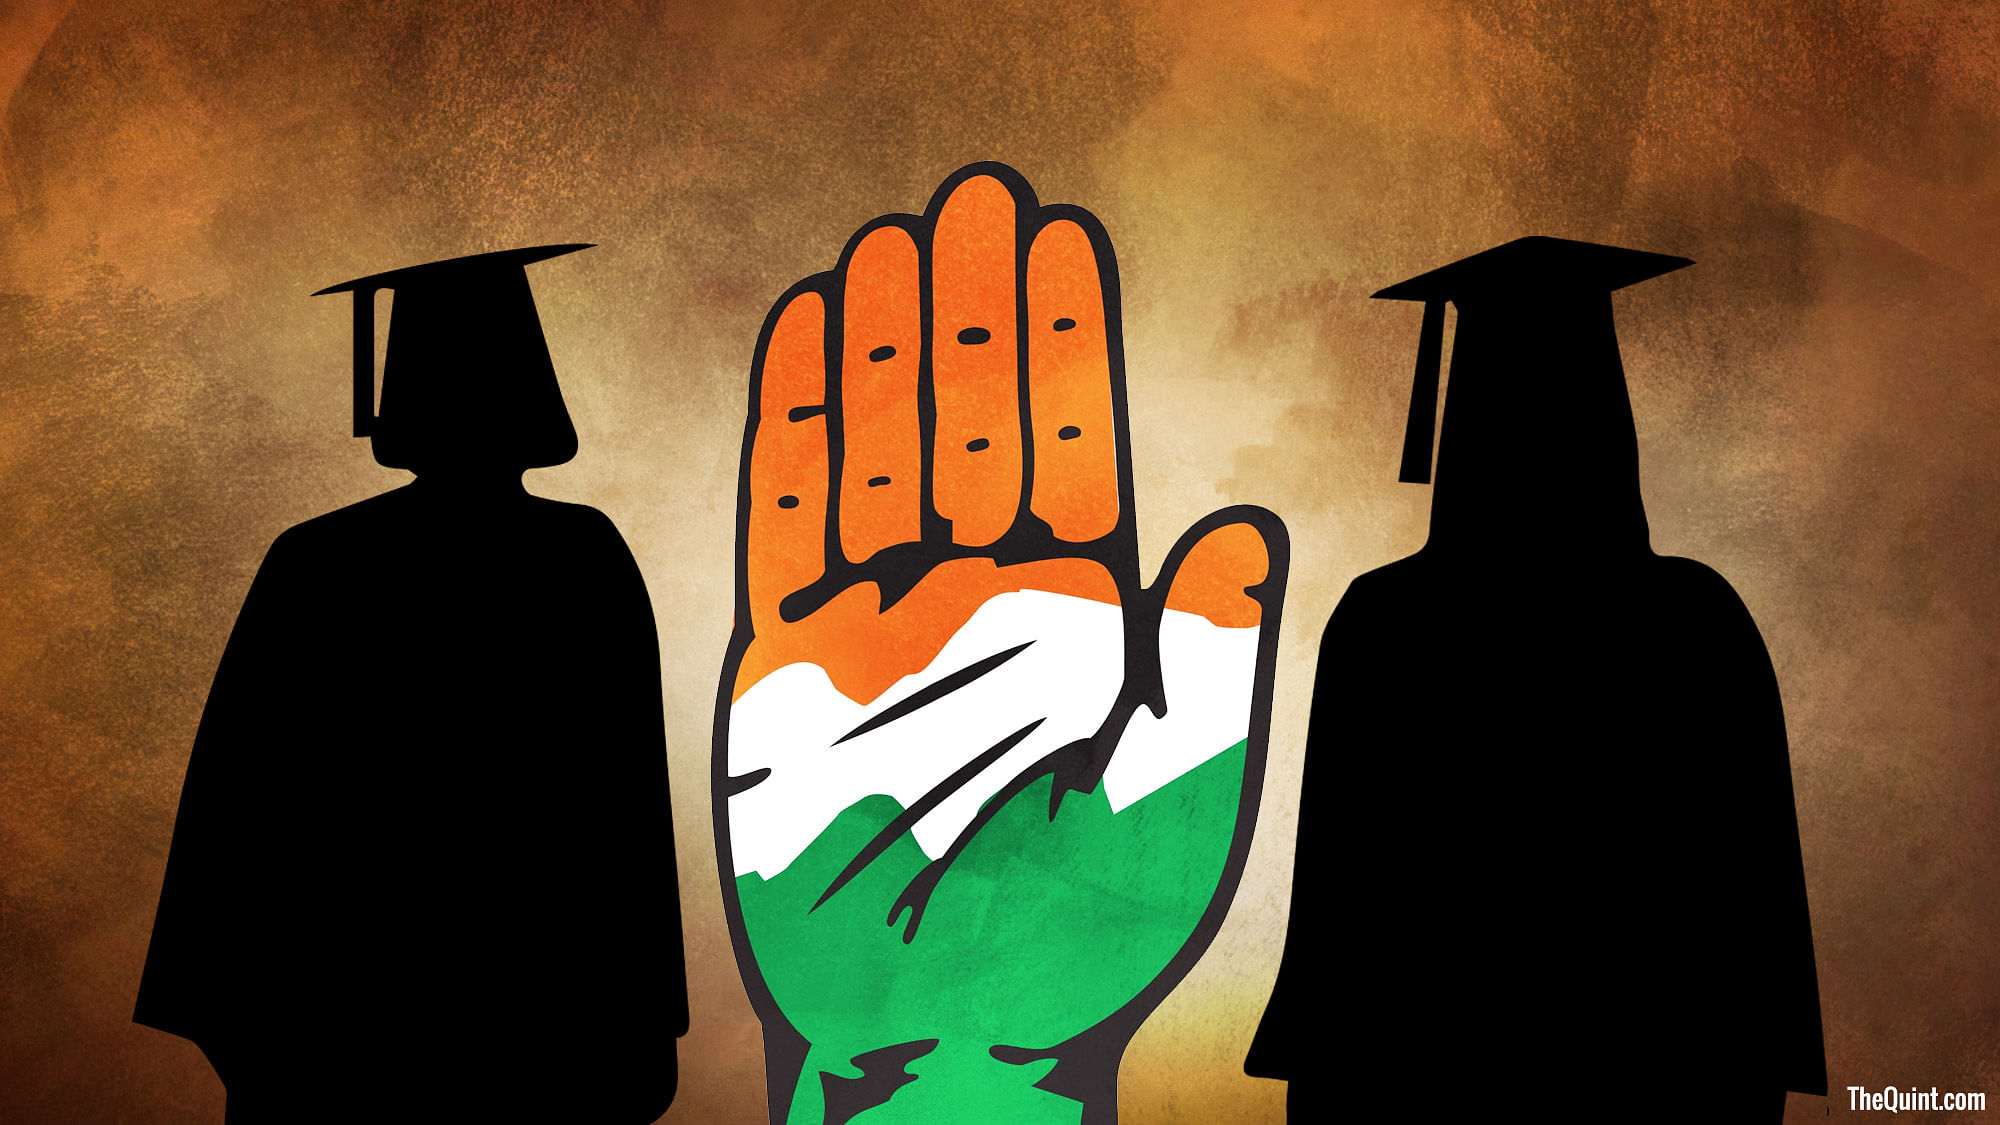 

The Congress-affiliated NSUI won two of the four seats. The other two were bagged by the RSS-backed ABVP.